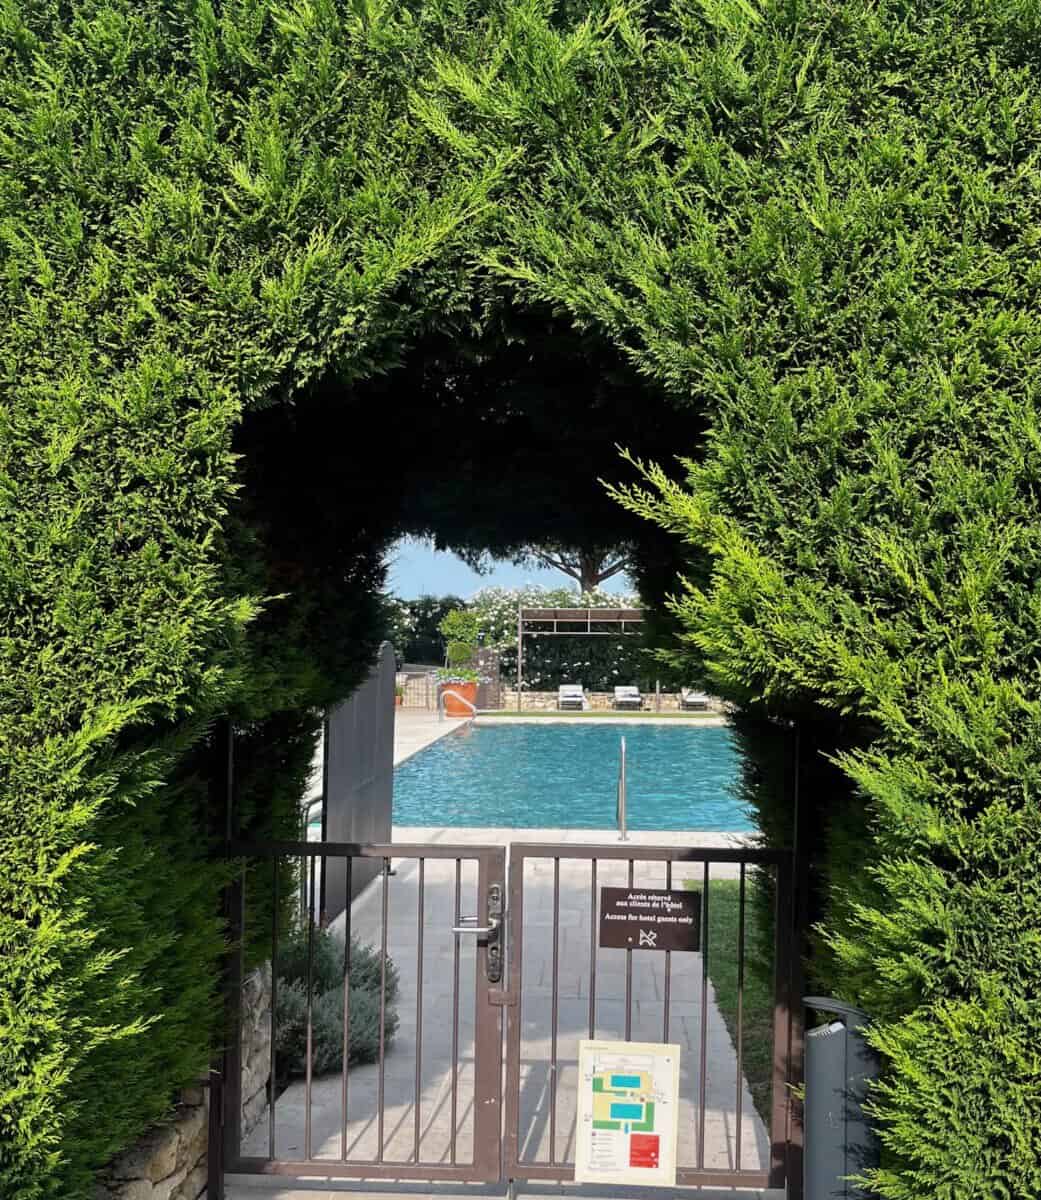 grassy archway with a swimming pool in the backdrop